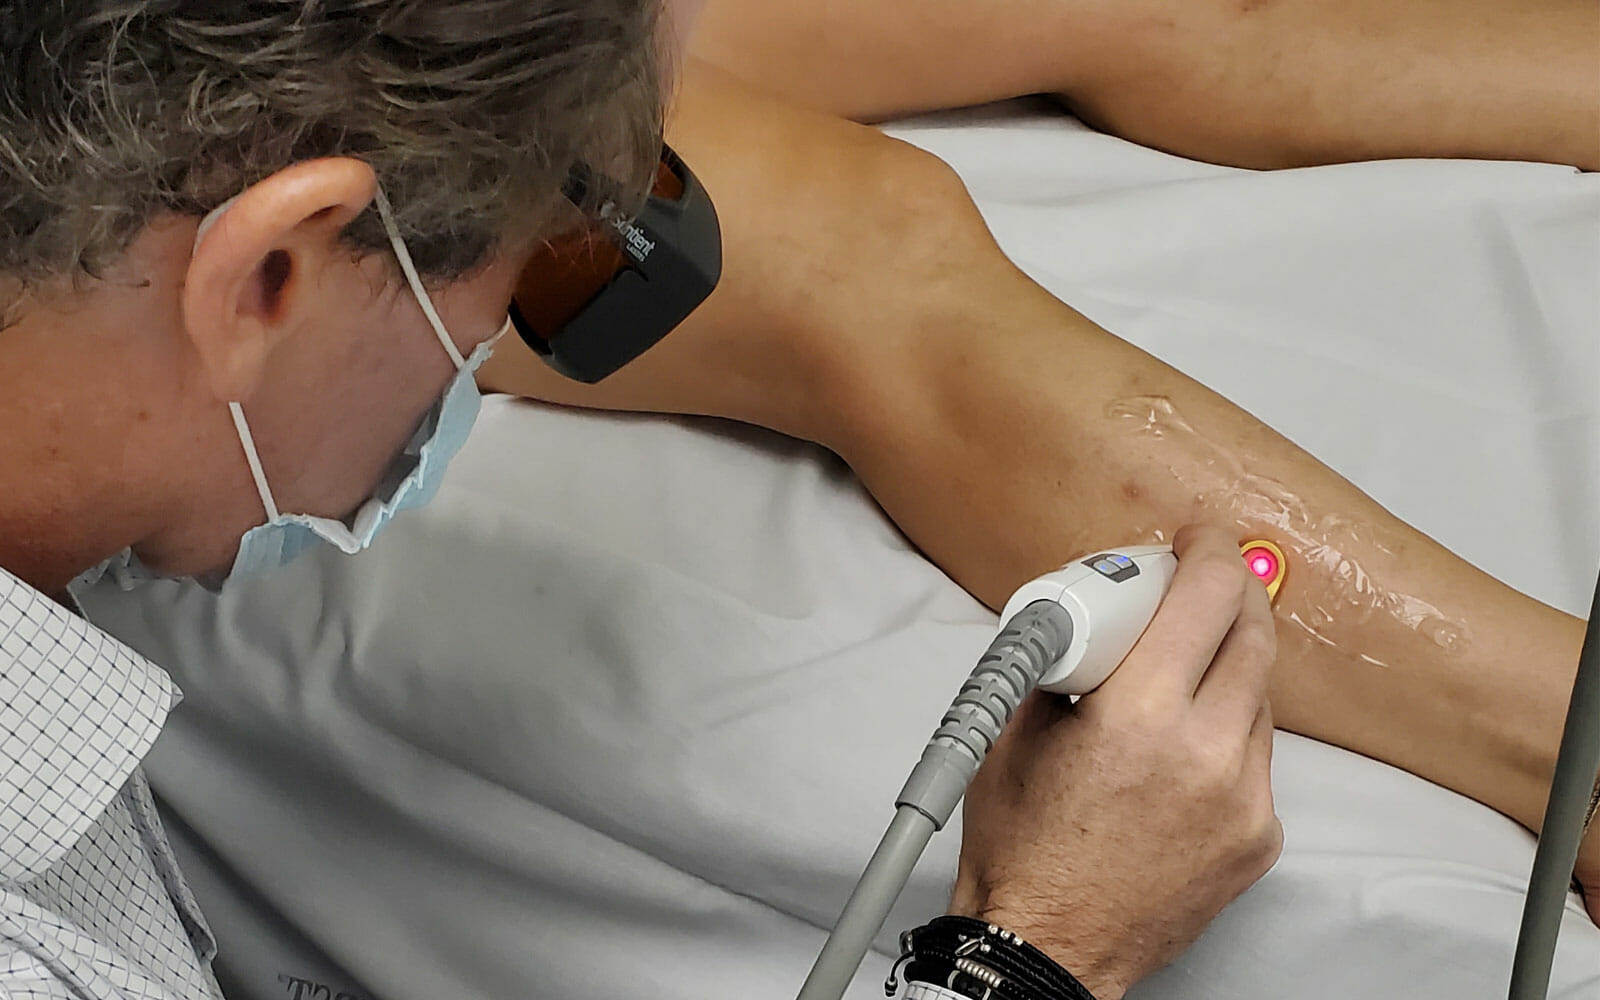 Doctor uses the cutera excel v laser to treat vascular disease in patient's leg.